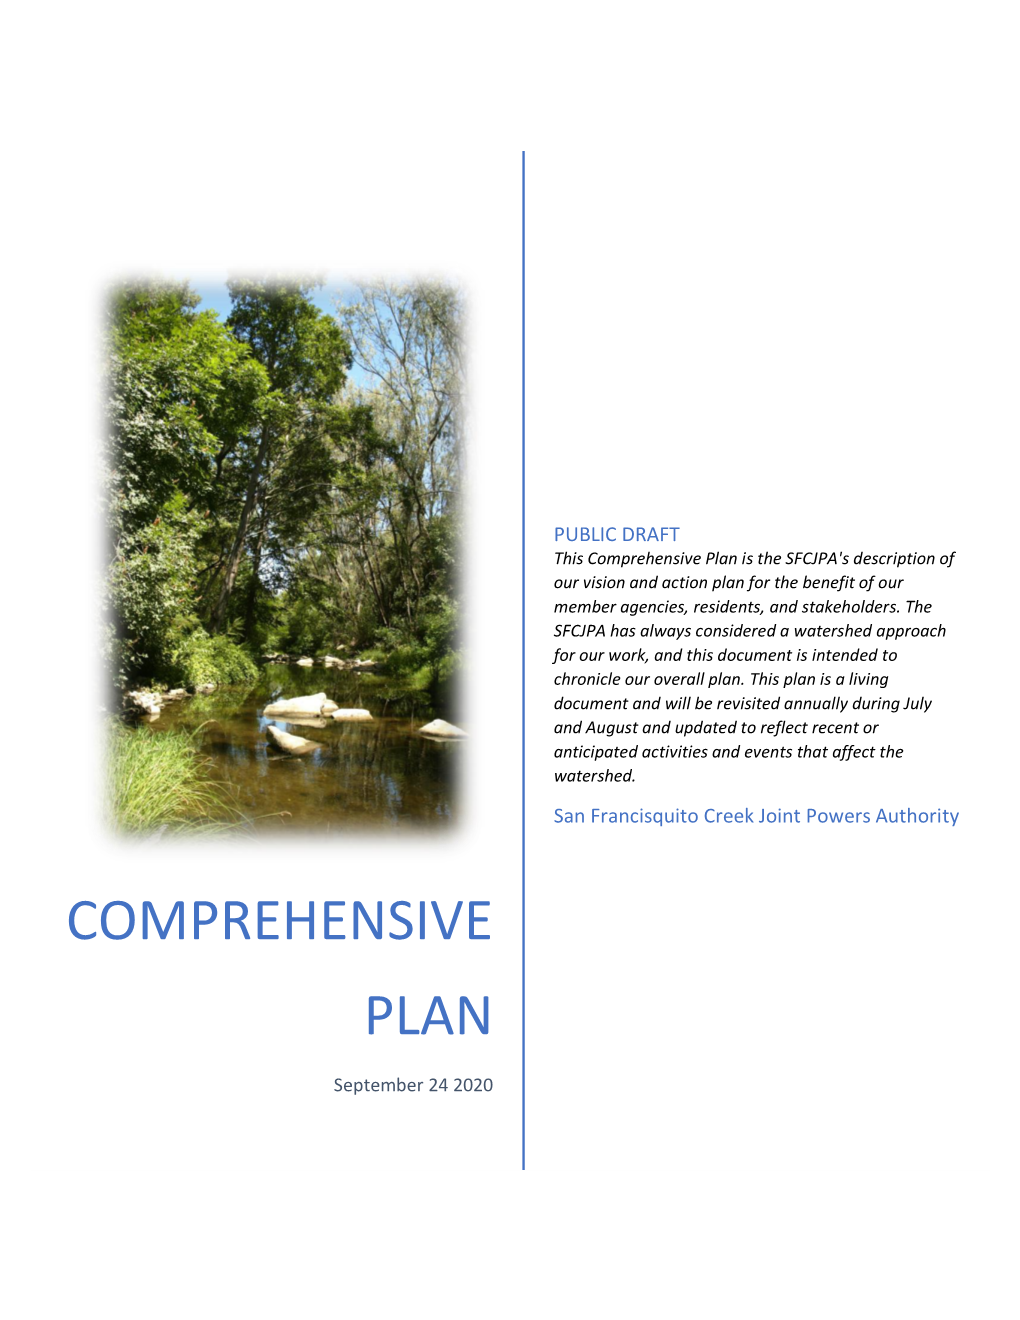 Comprehensive Plan Is the SFCJPA's Description of Our Vision and Action Plan for the Benefit of Our Member Agencies, Residents, and Stakeholders